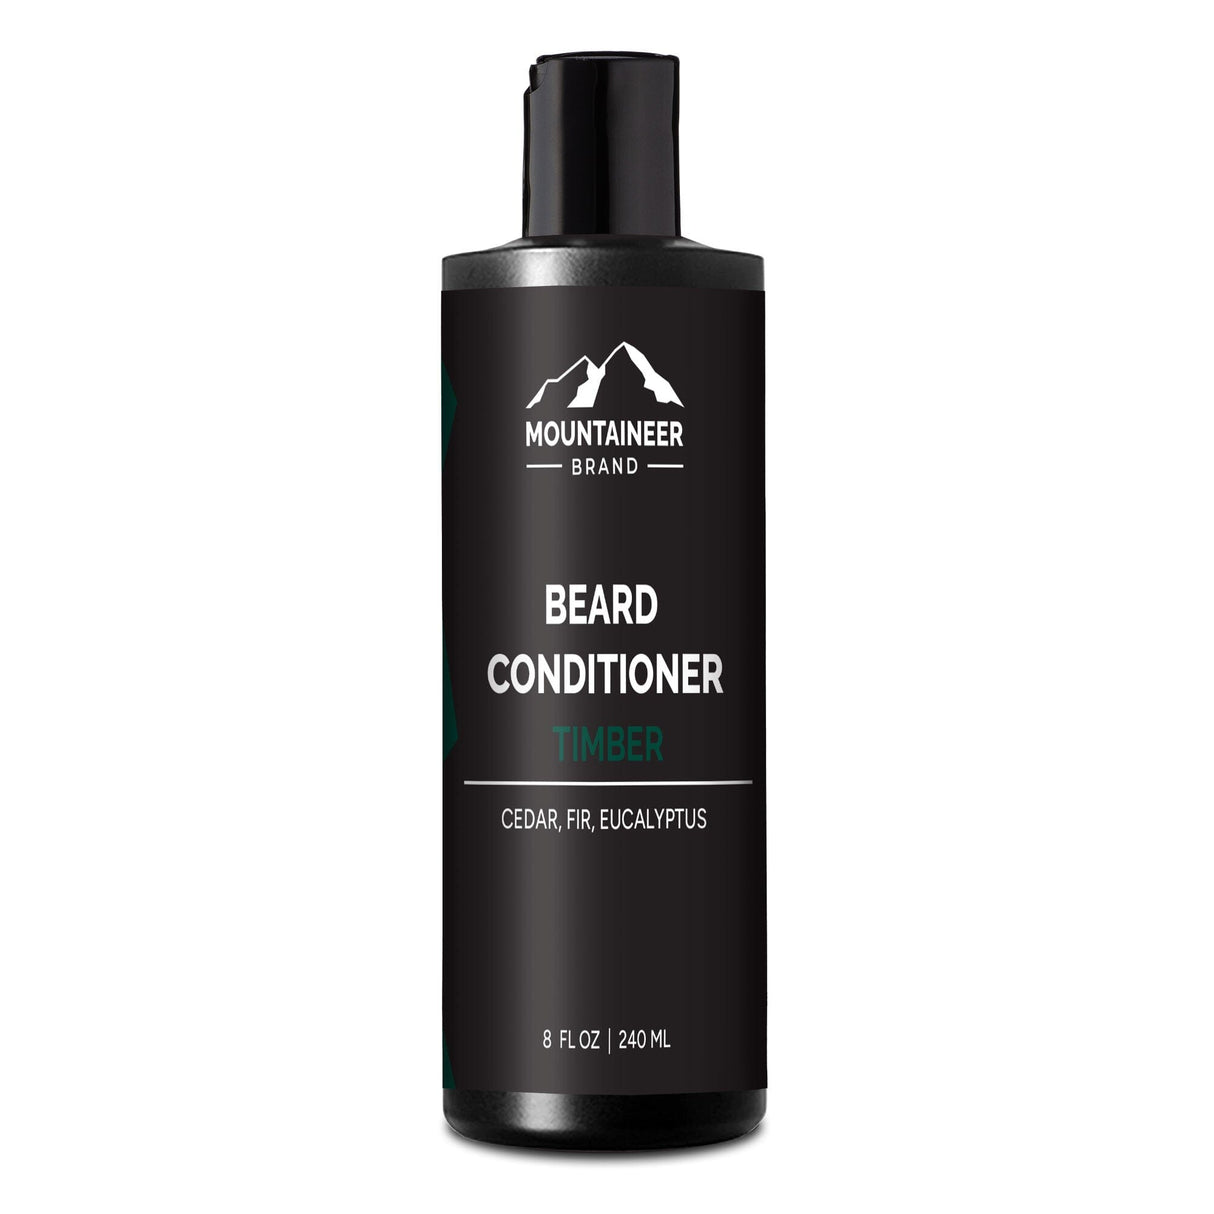 An organic bottle of Timber Beard Conditioner by Mountaineer Brand Products on a white background, catering to men's care needs without any harmful chemicals.